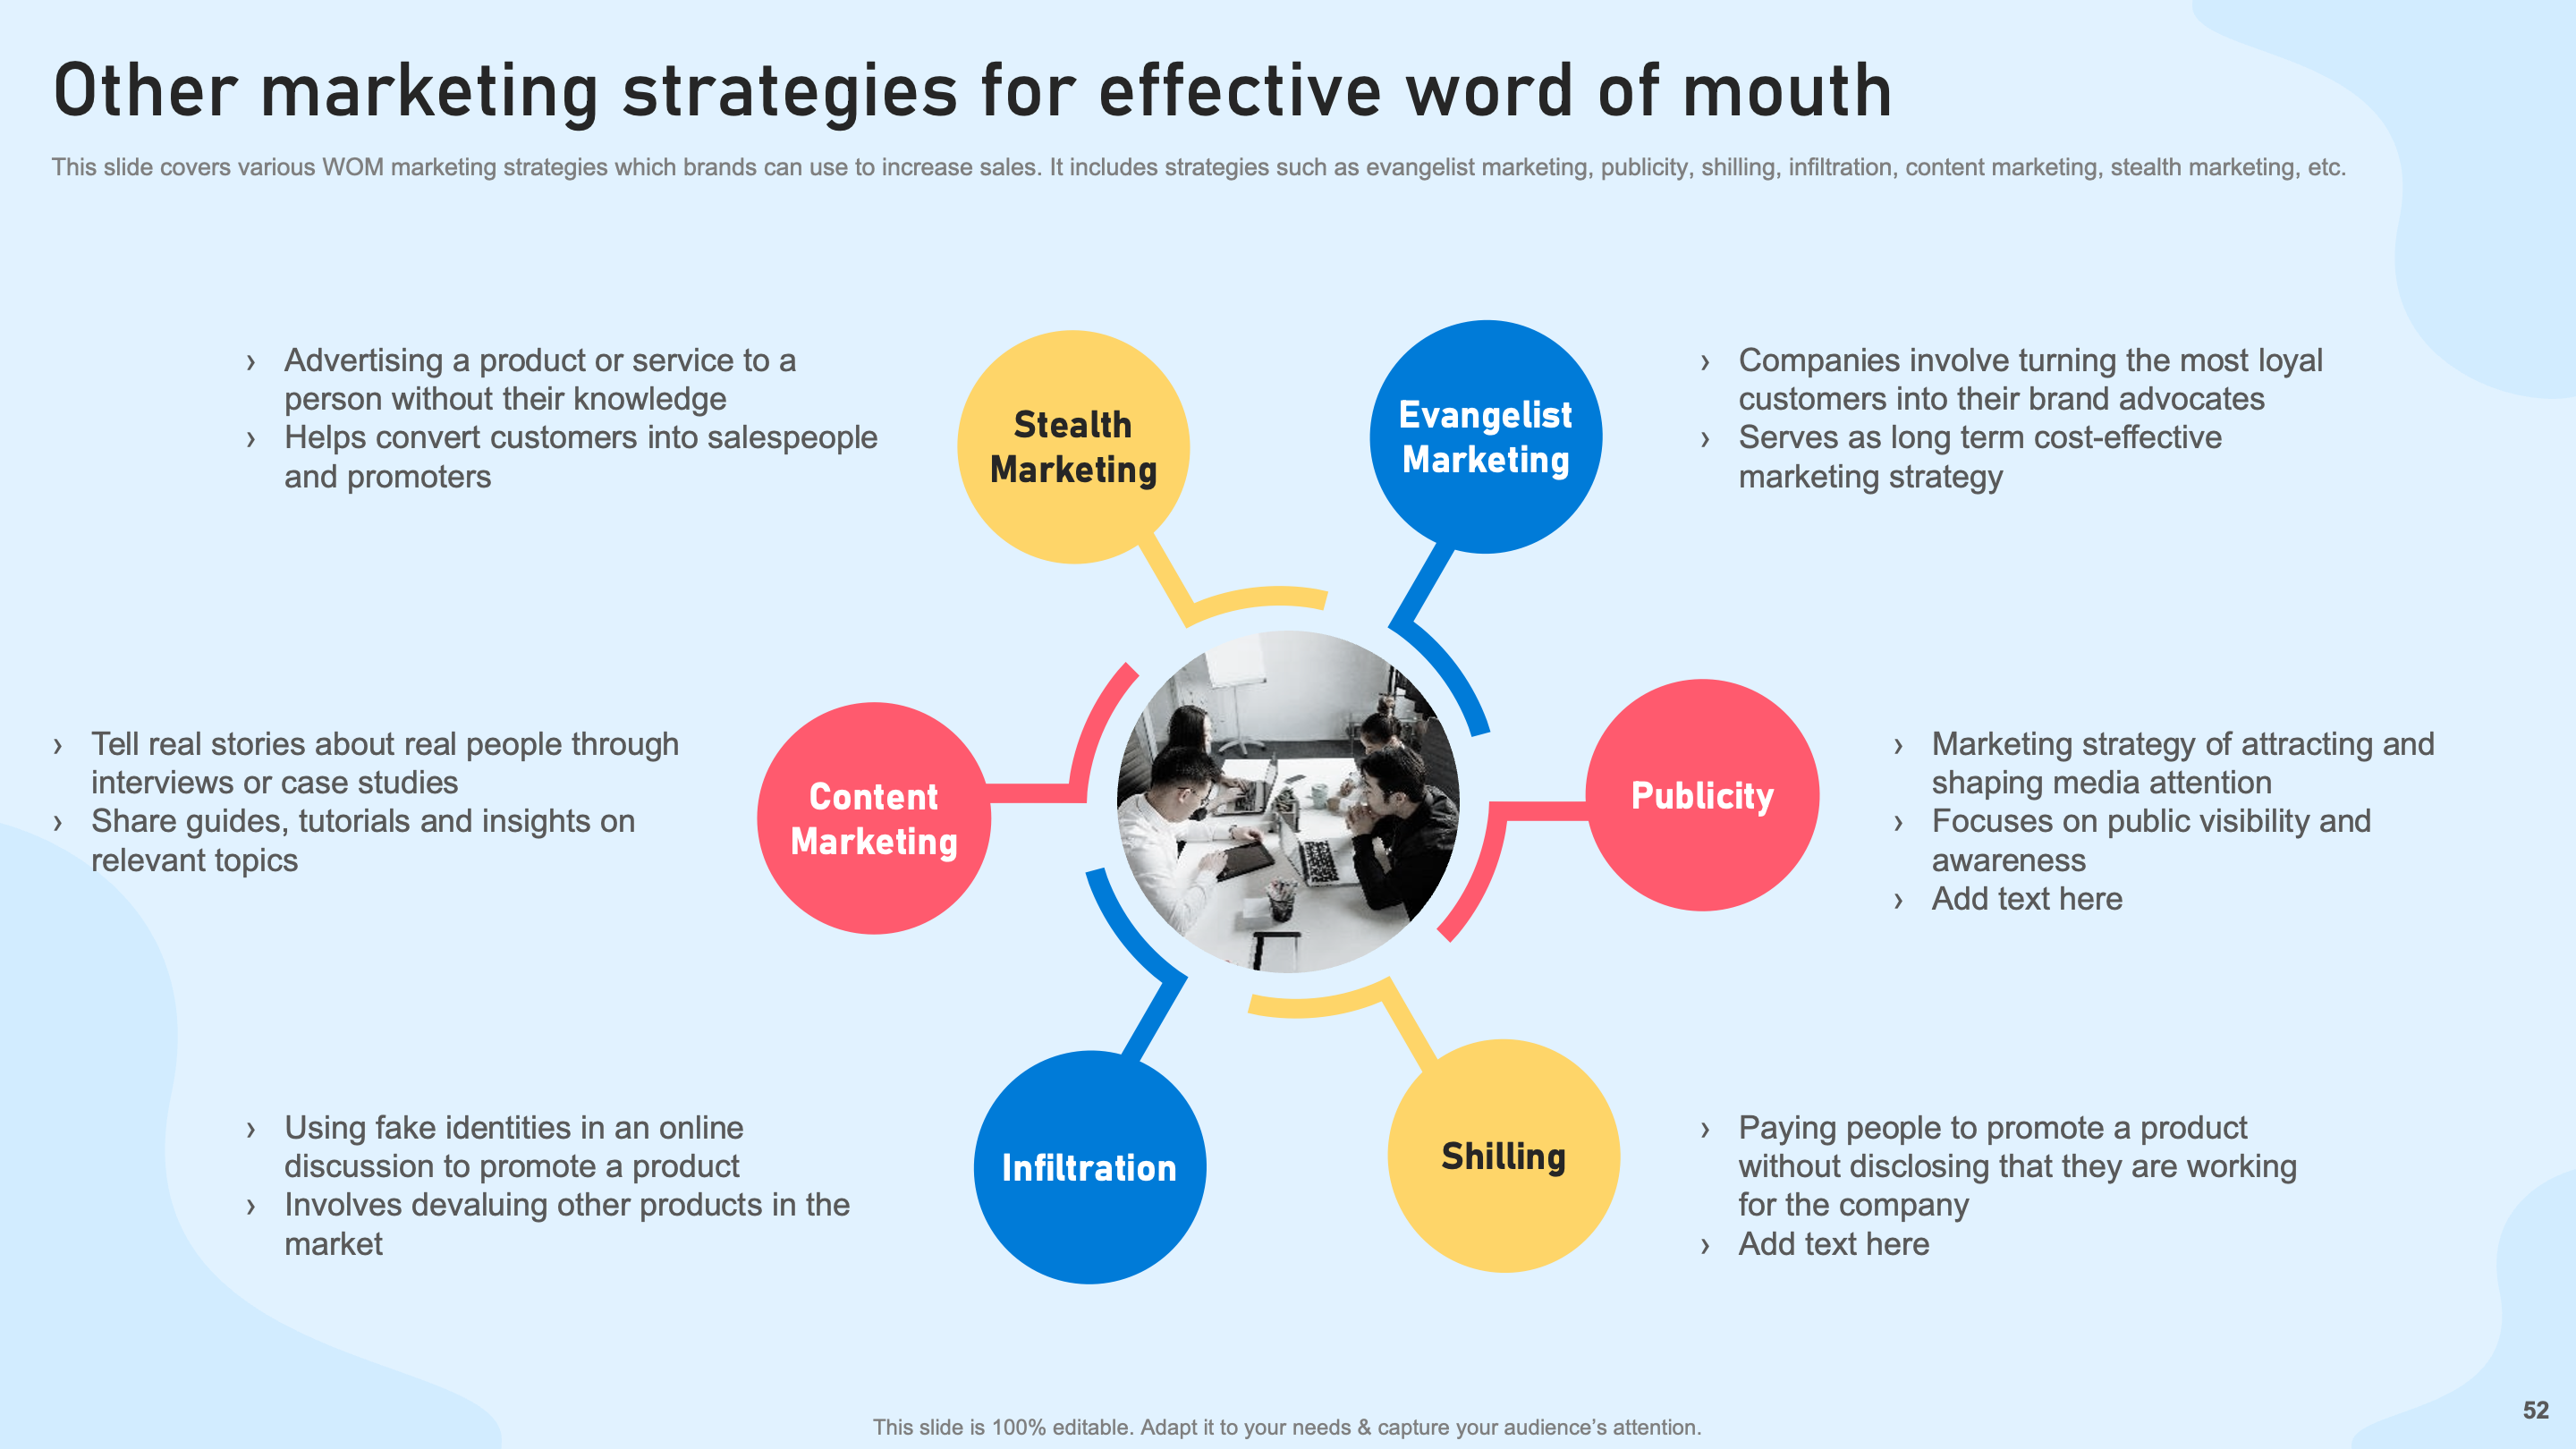 Other Marketing Strategies for Effective Word of Mouth